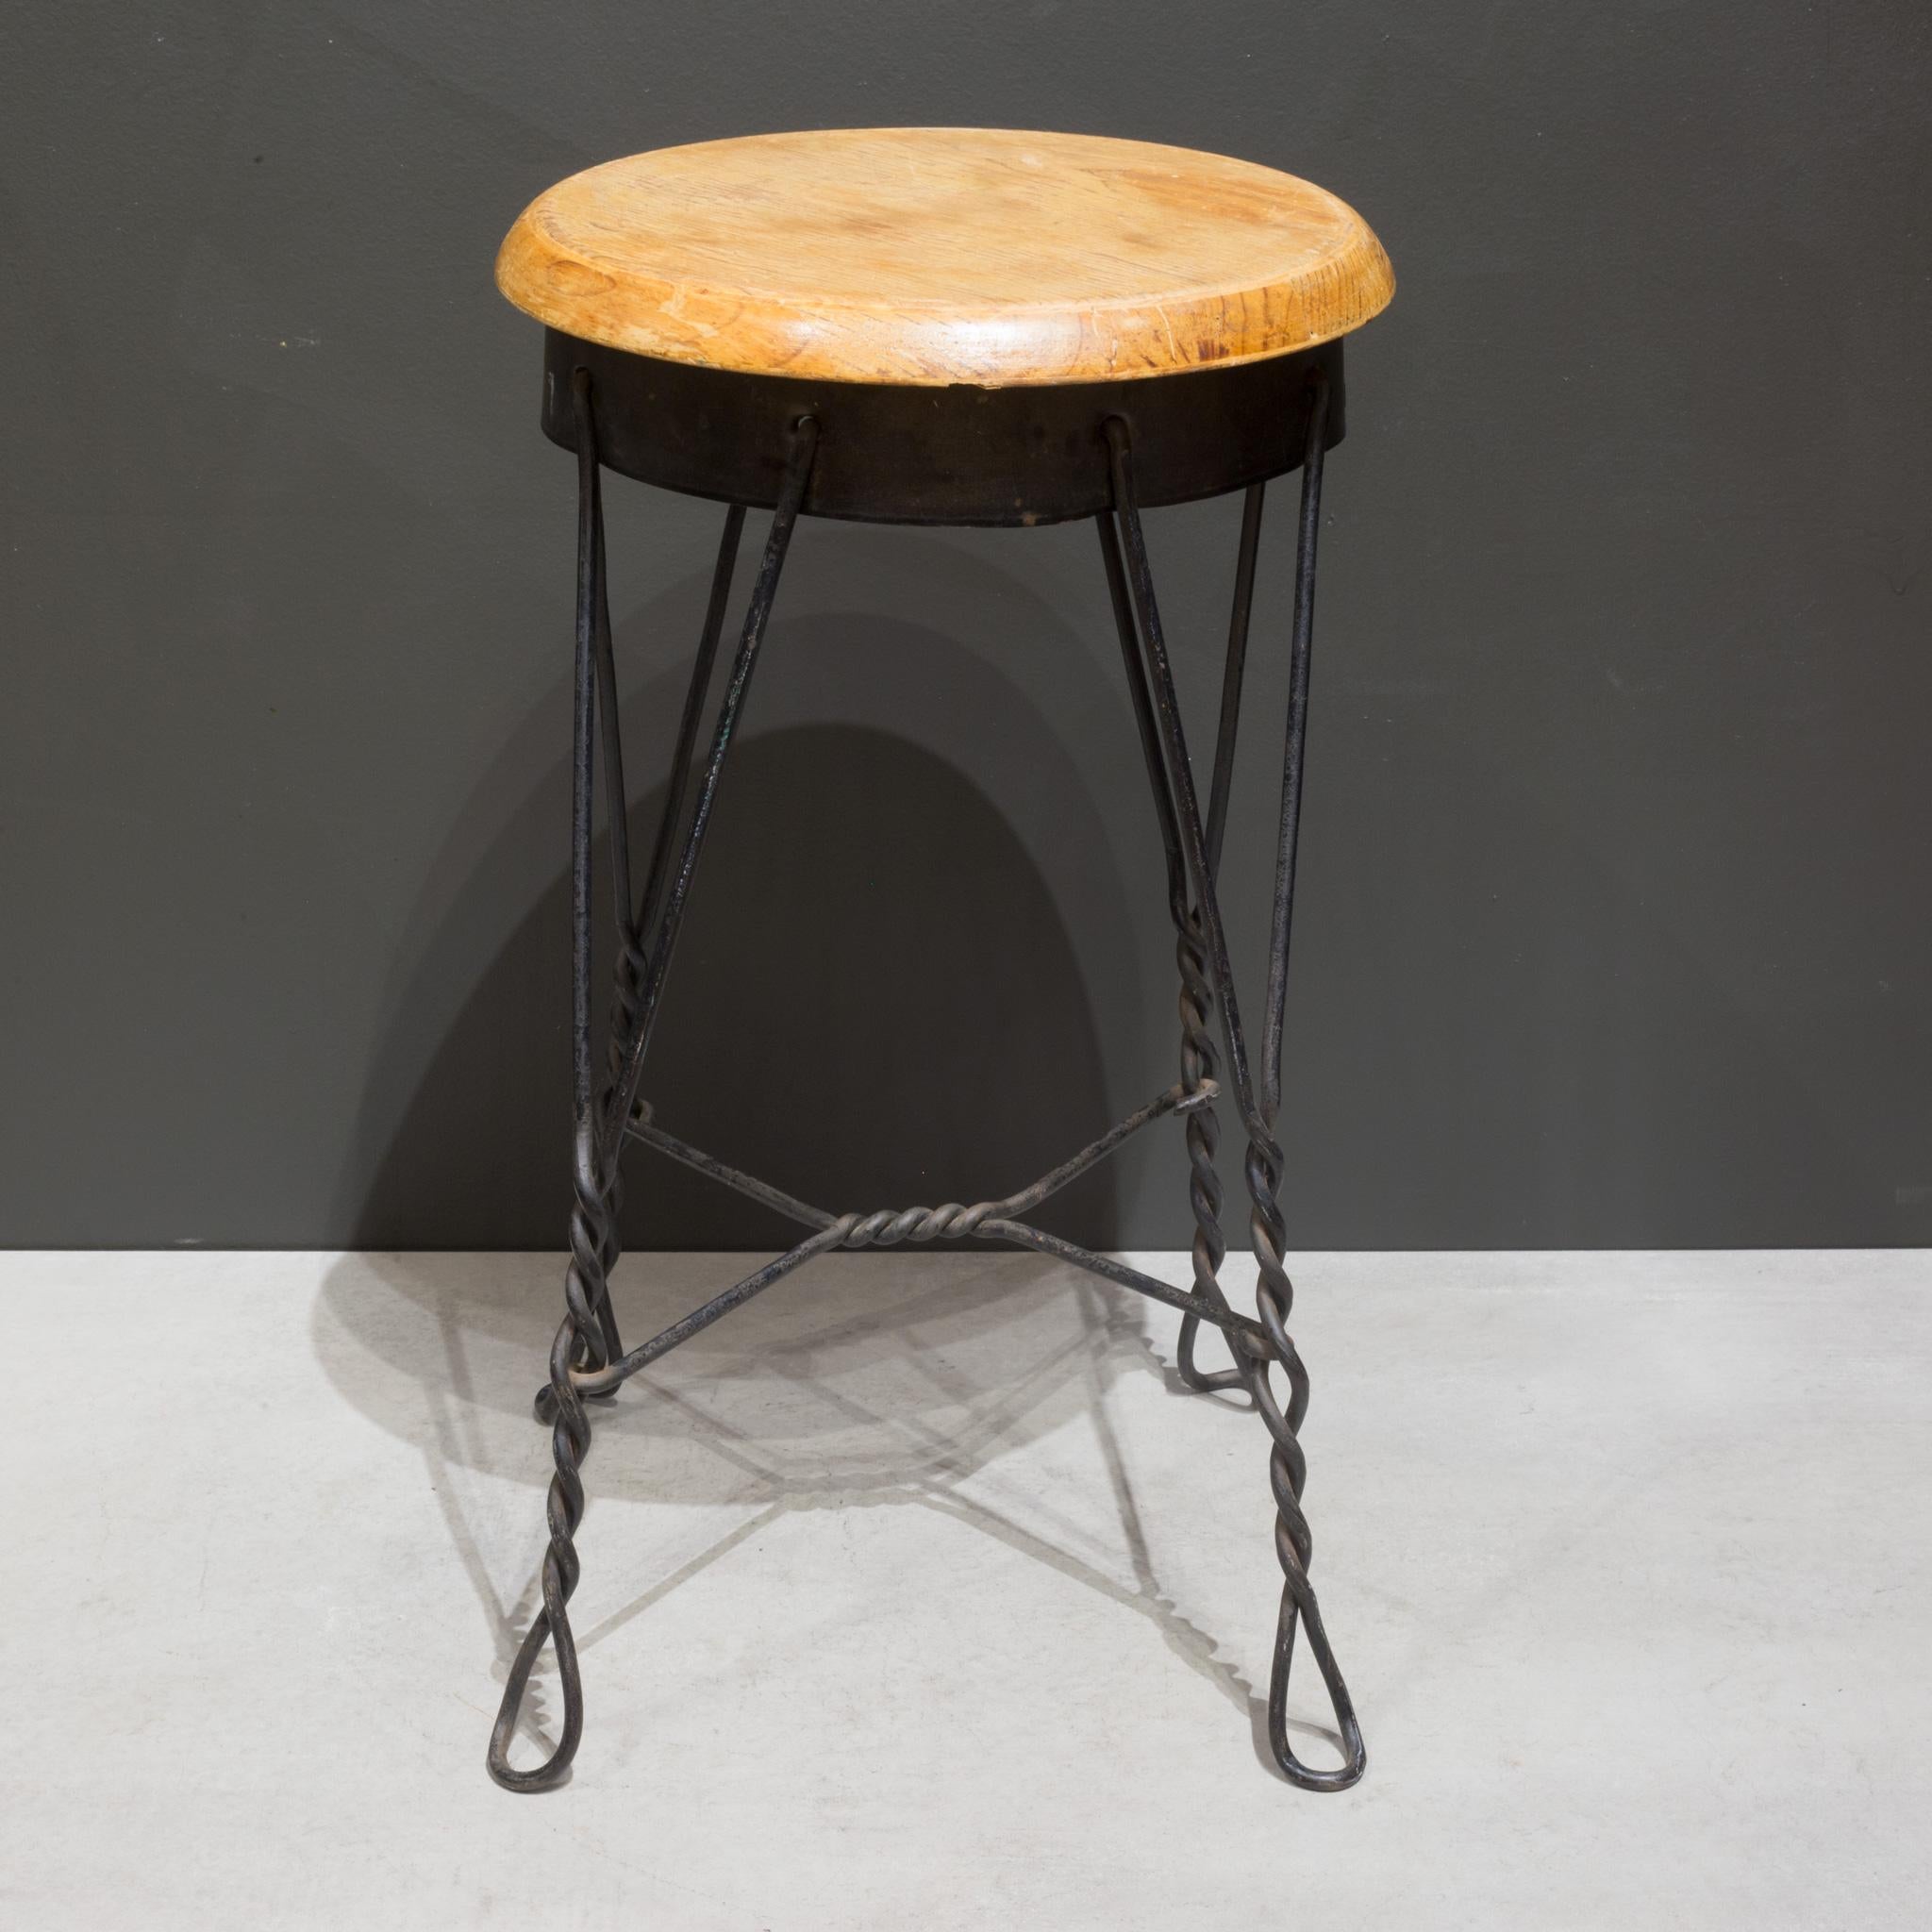 About

An original early 20th century twisted wire fixed small stool. The round stool seat is made of solid oak wood retaining the original stained finish.

Creator unknown.
Date of manufacture c.1920-1940.
Materials & techniques steel,